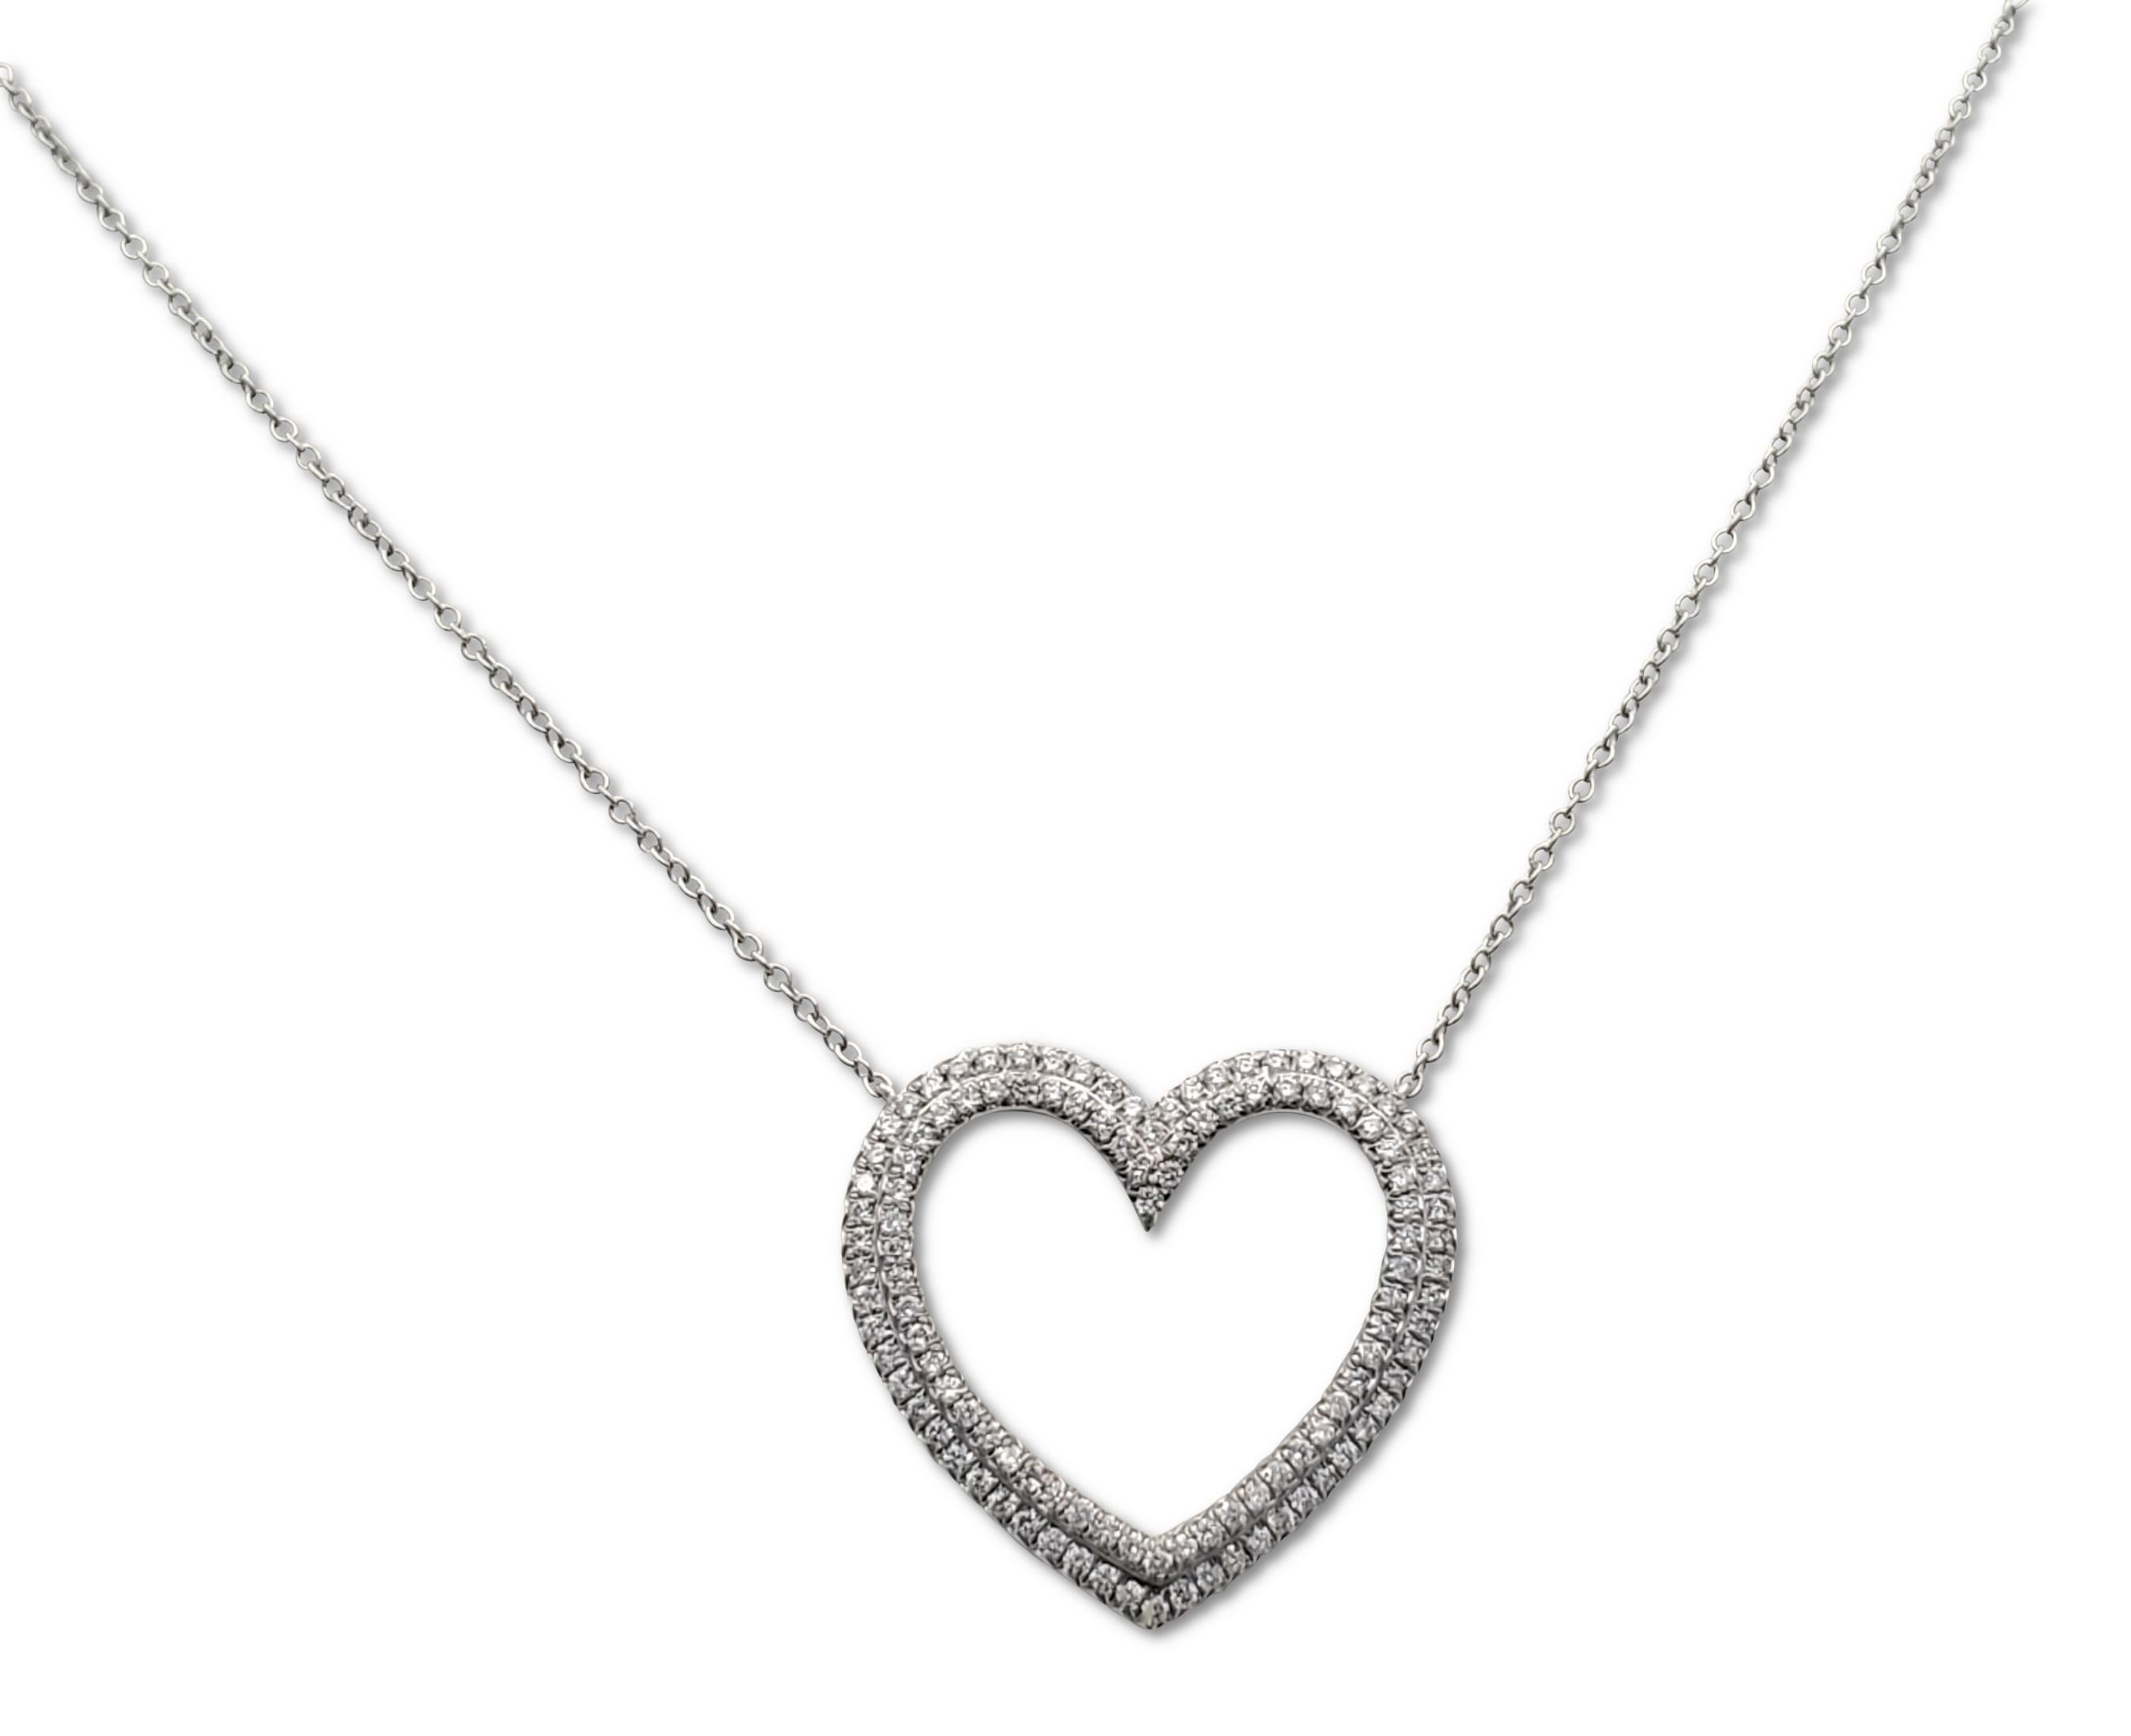 Authentic Tiffany & Co. necklace from the 'Metro' collection centers on a platinum double heart design pendant pave set with an estimated 0.78 carats of high quality round brilliant cut diamonds (E-F color, VS clarity). The pendant is situated on a